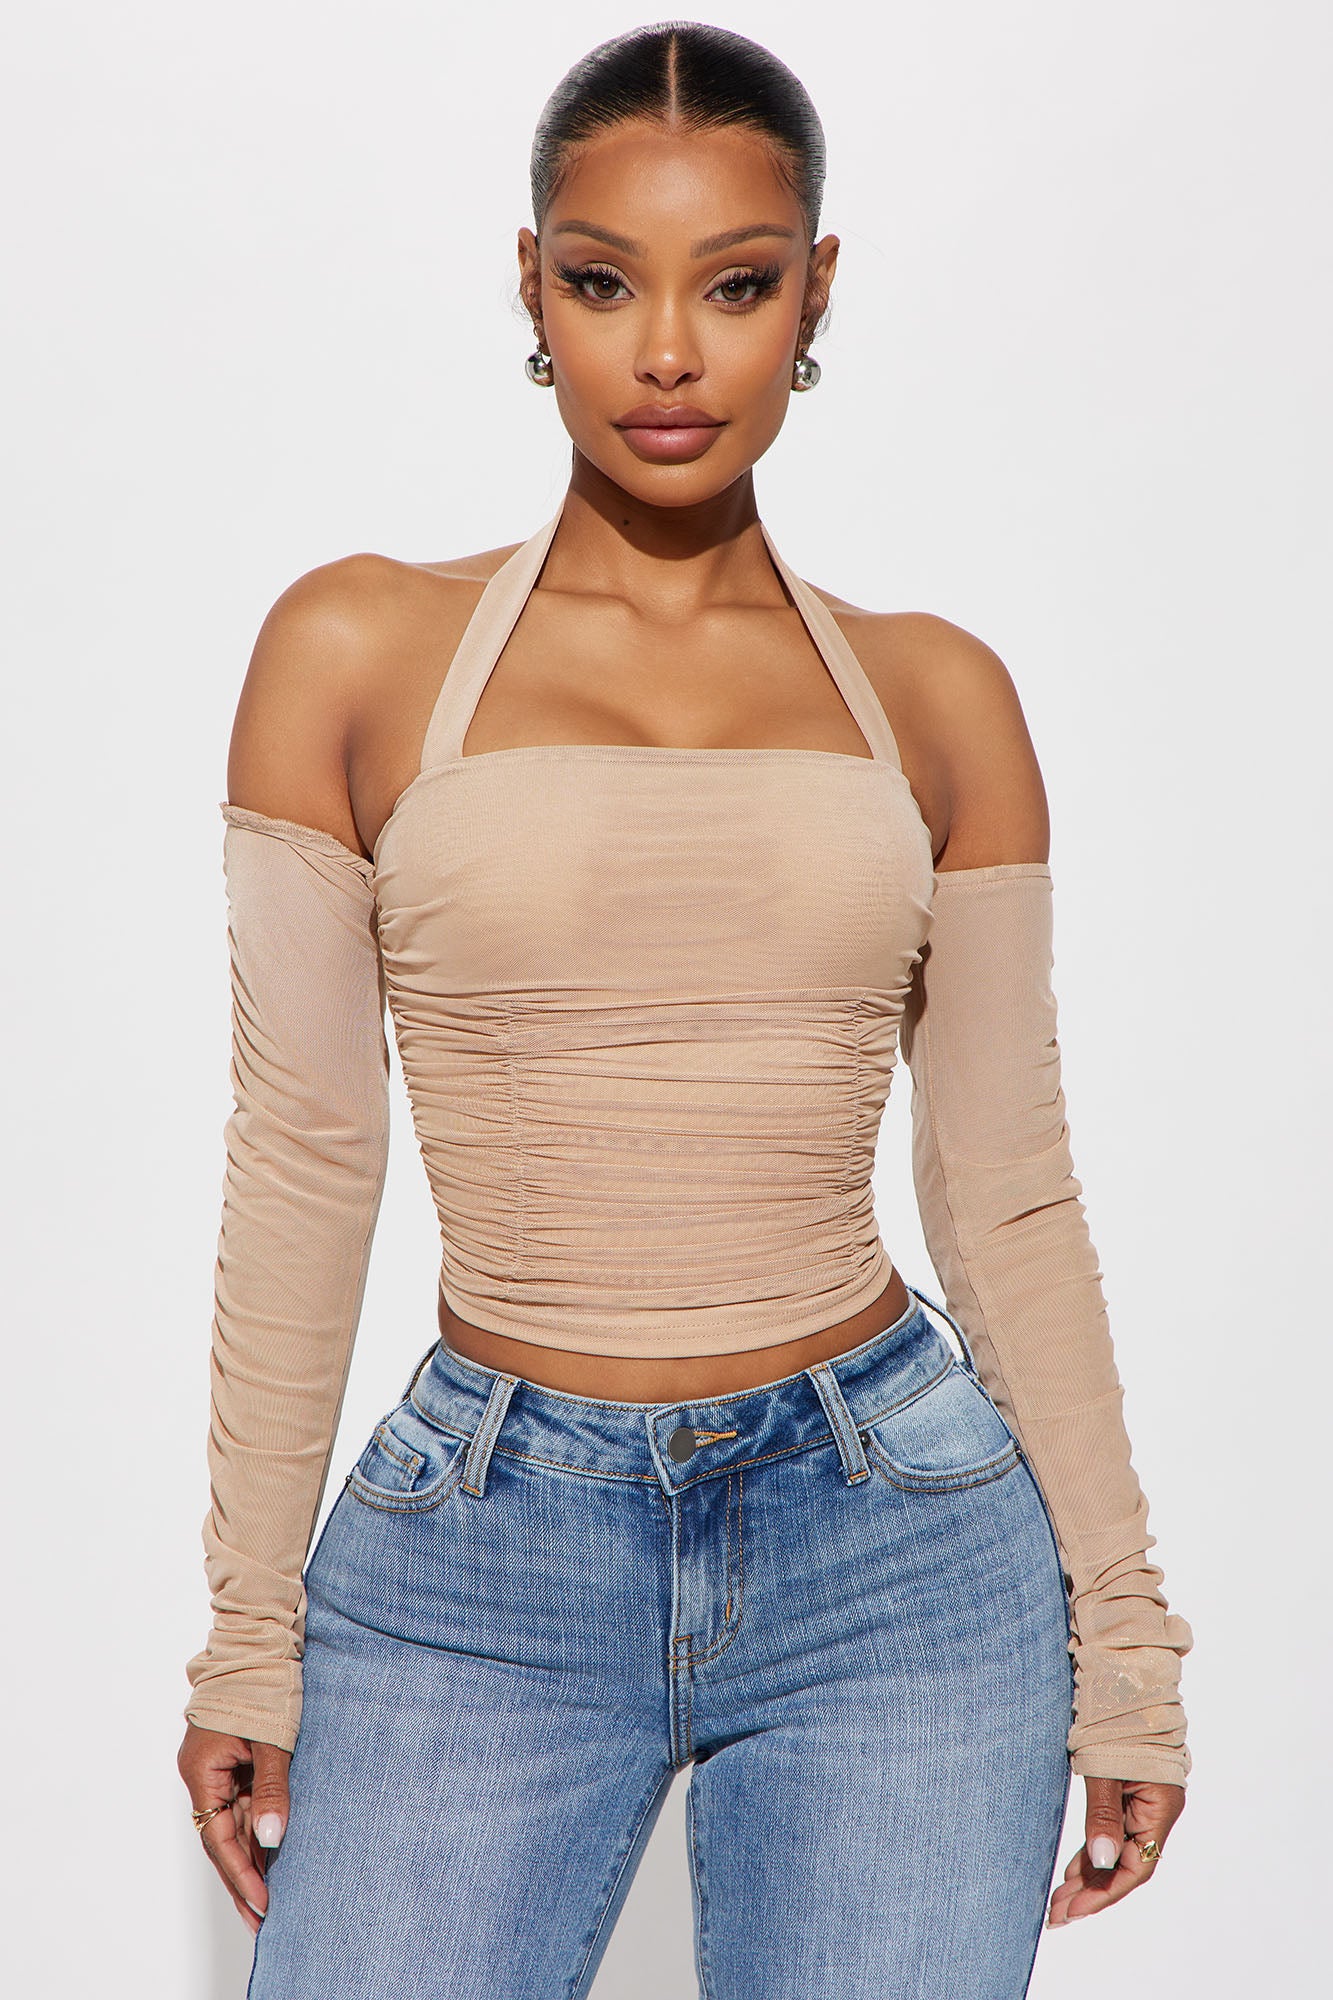 White Crop Top Long Sleeve Crop Top off Shoulder Top Form Fitting Lyla's  Crop Tops for Women Cropped Top Belly Shirt -  Canada